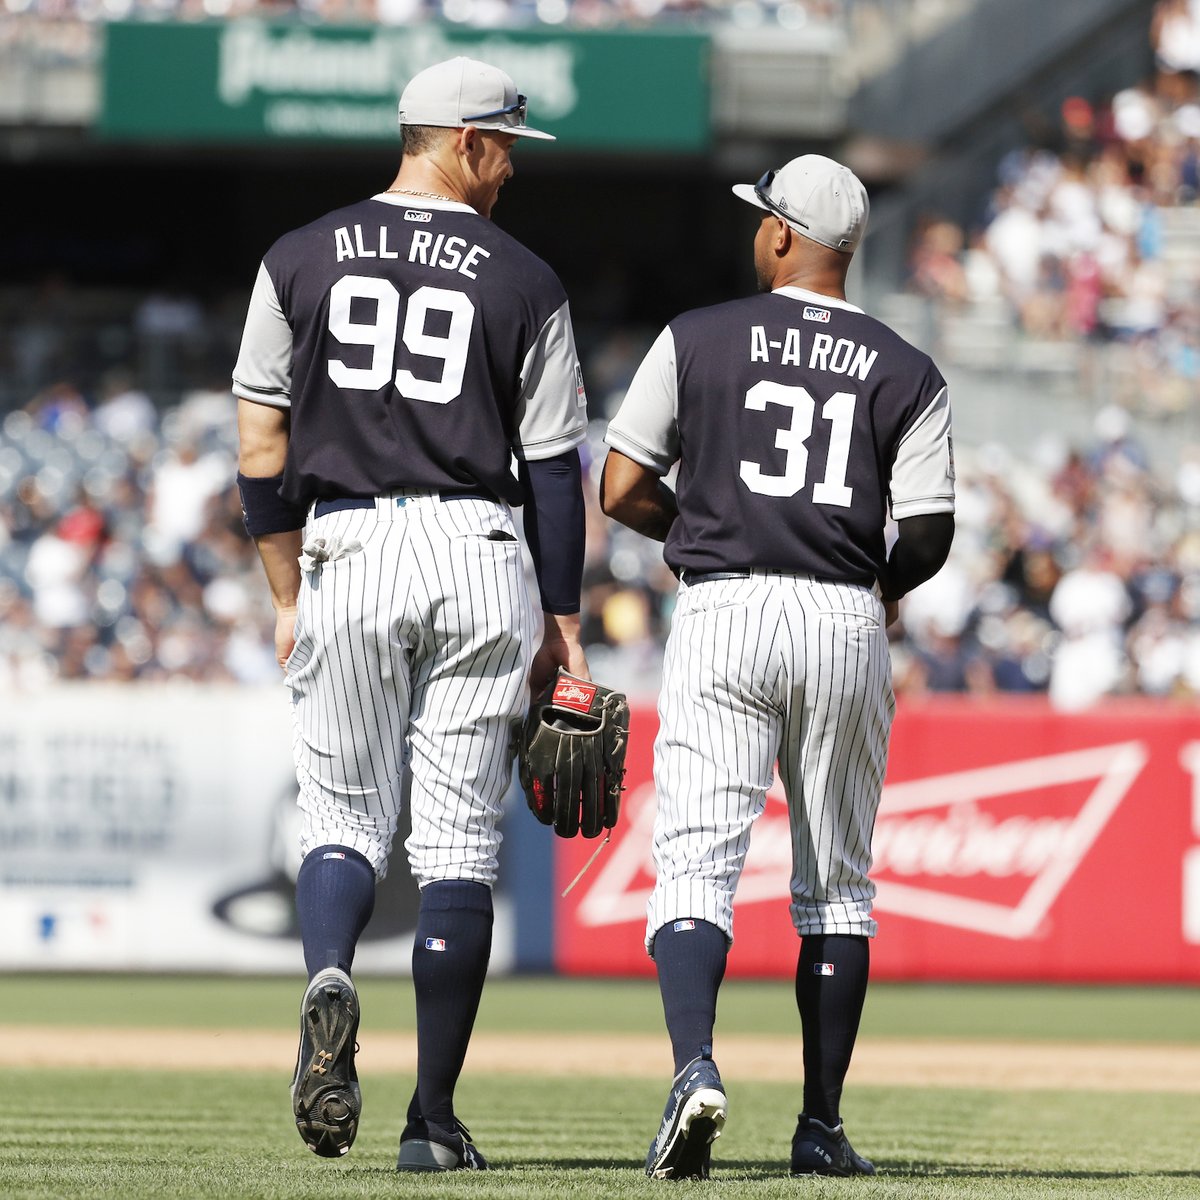 Paul Lukas on X: Notable Moments in NOB History: With MLB players  encouraged to wear nicknames for 2017's Players Weekend promotion, the  Yankees wore NOBs for first time in team history.  /